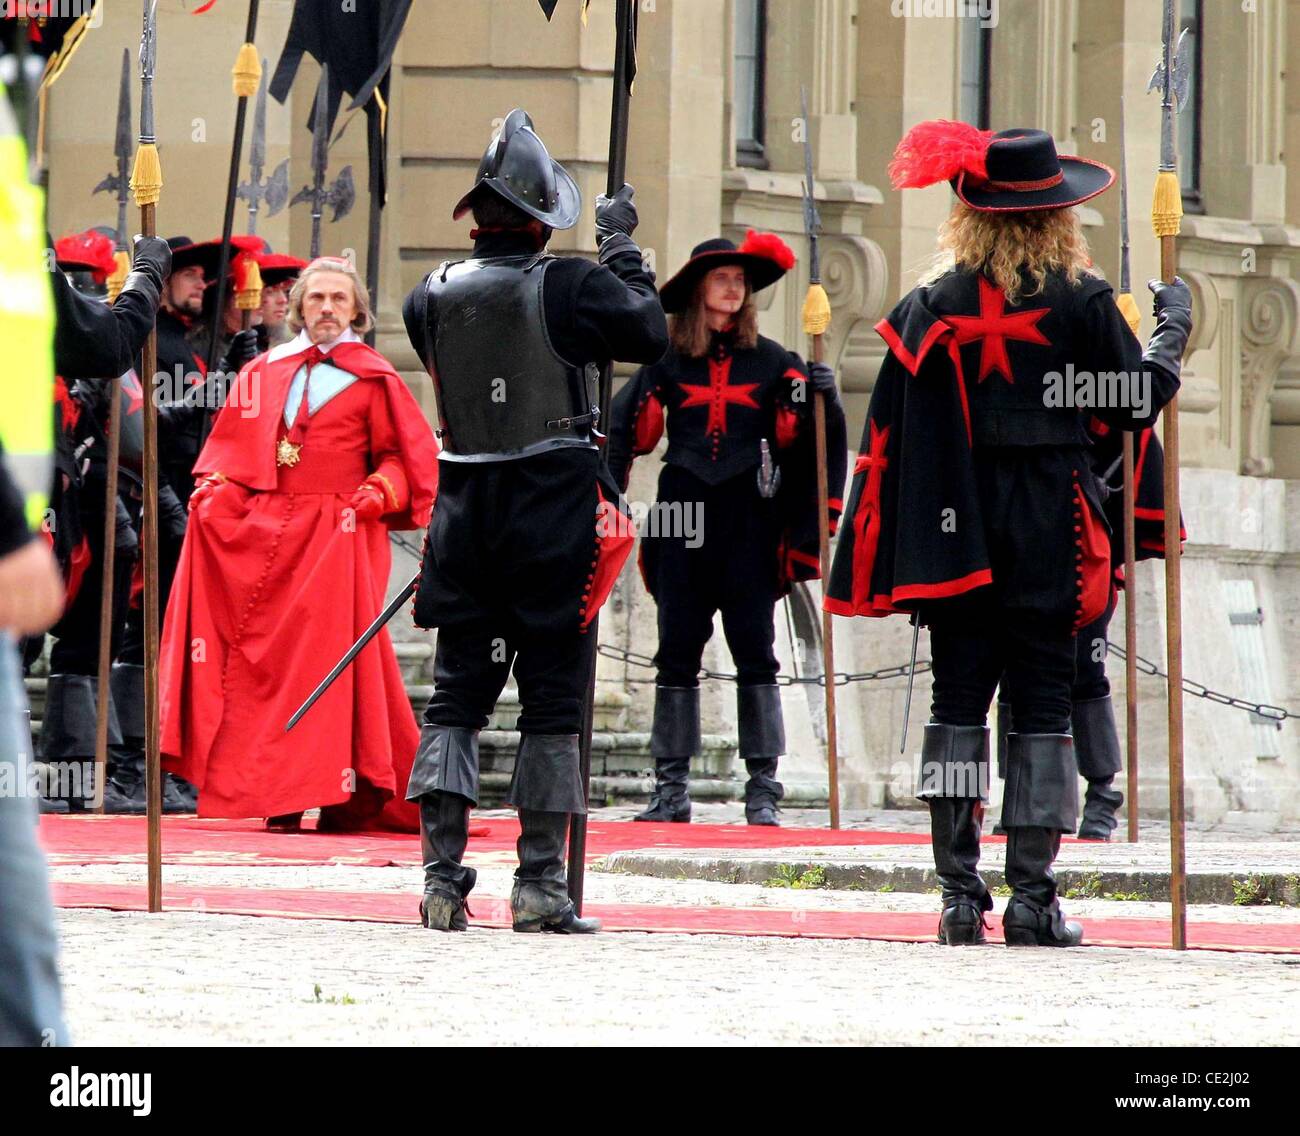 Christoph Waltz in costume as "Cardinal Richelieu" on the set of 'The Three  Musketeers' at Residenz Wuerzburg. Wuerzburg, Germany - 16.09.2010 Stock  Photo - Alamy